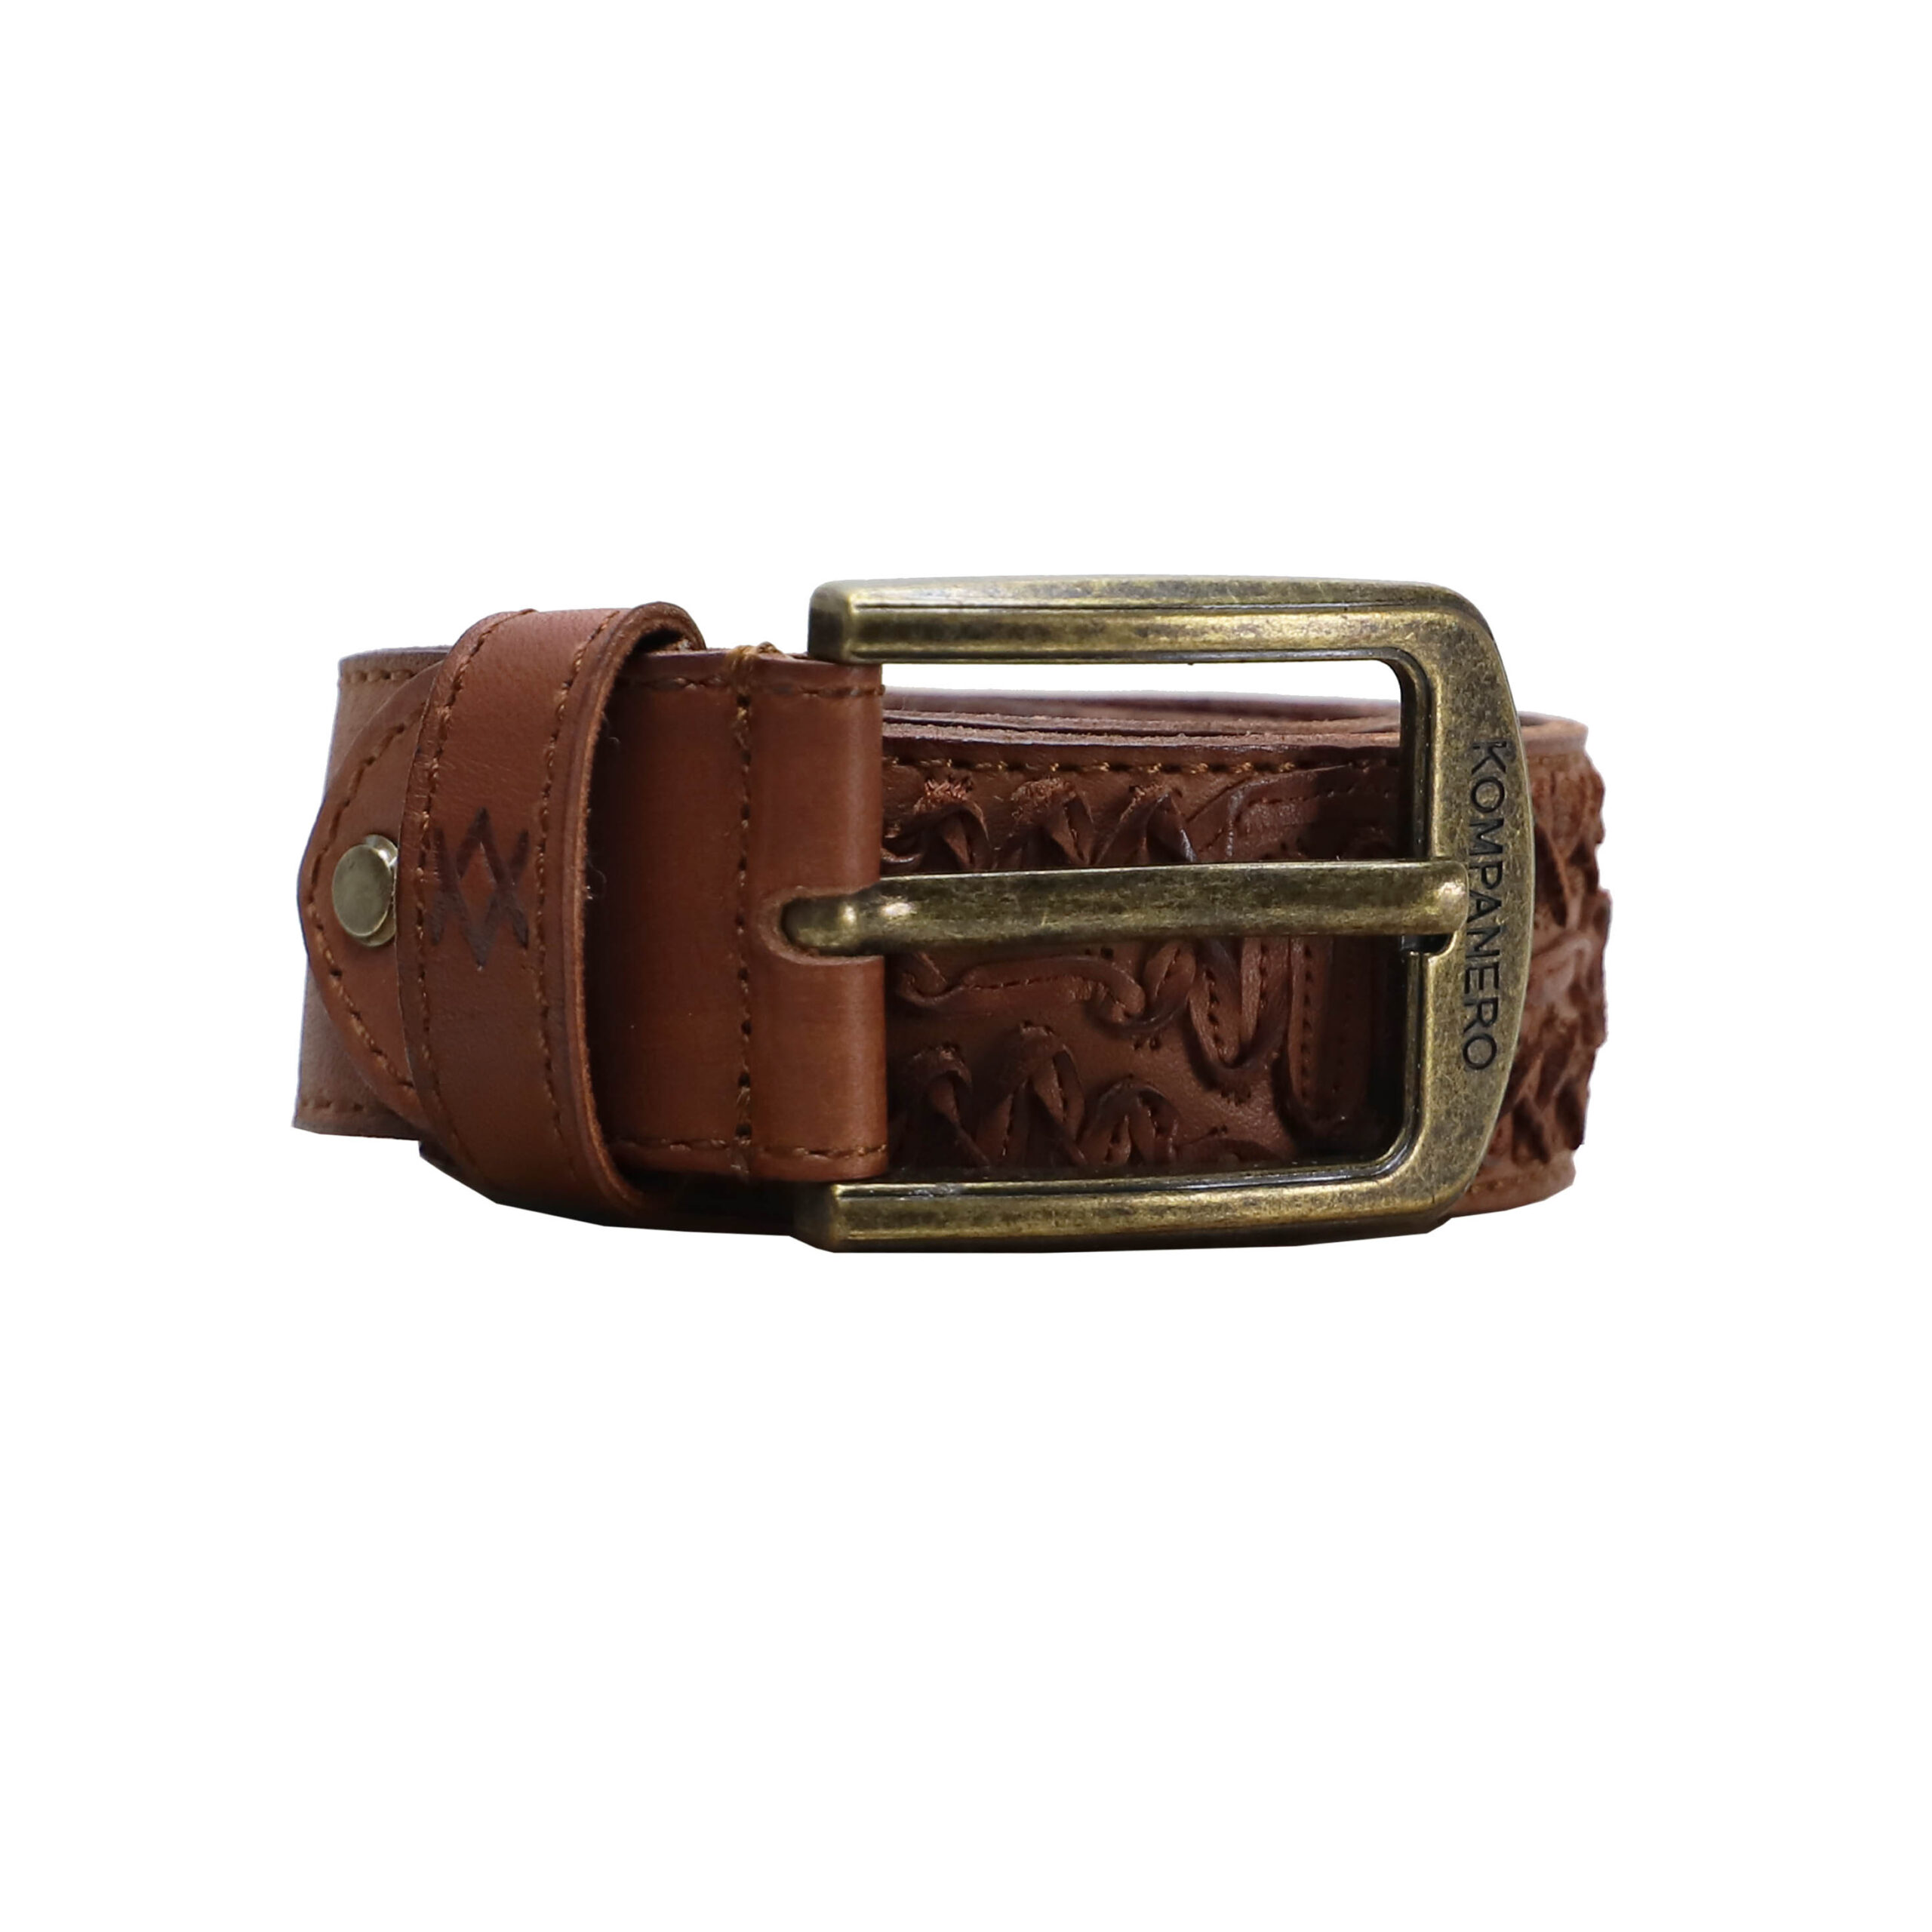 Madrid Leather Belt by Kompanero Available in Cognac